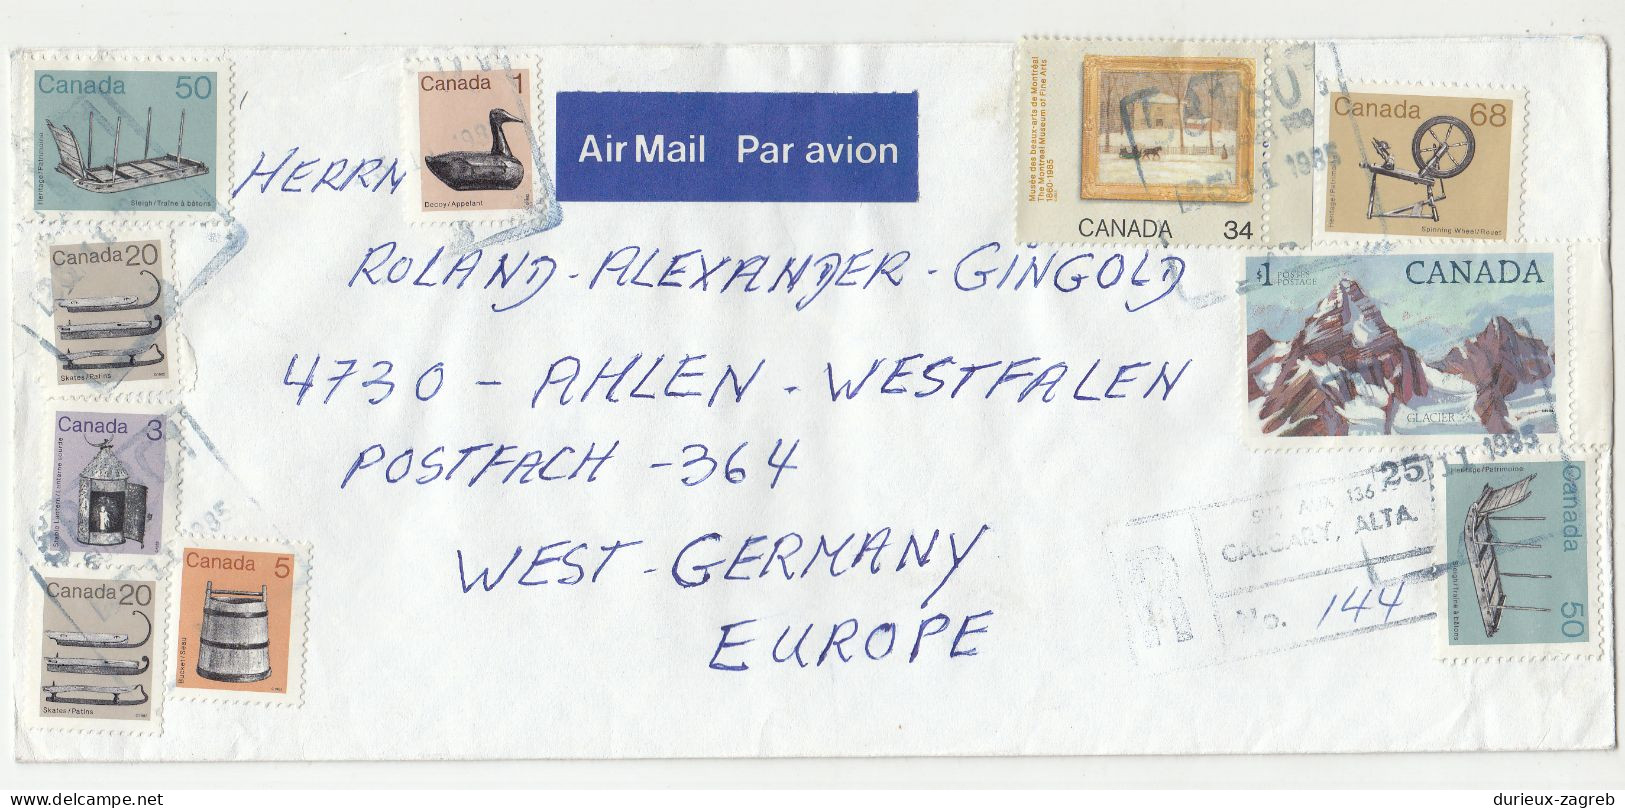 Canada Multifranked Letter Cover Posted Air Mail Registered 1985 Clagary To Germany B230701 - Covers & Documents